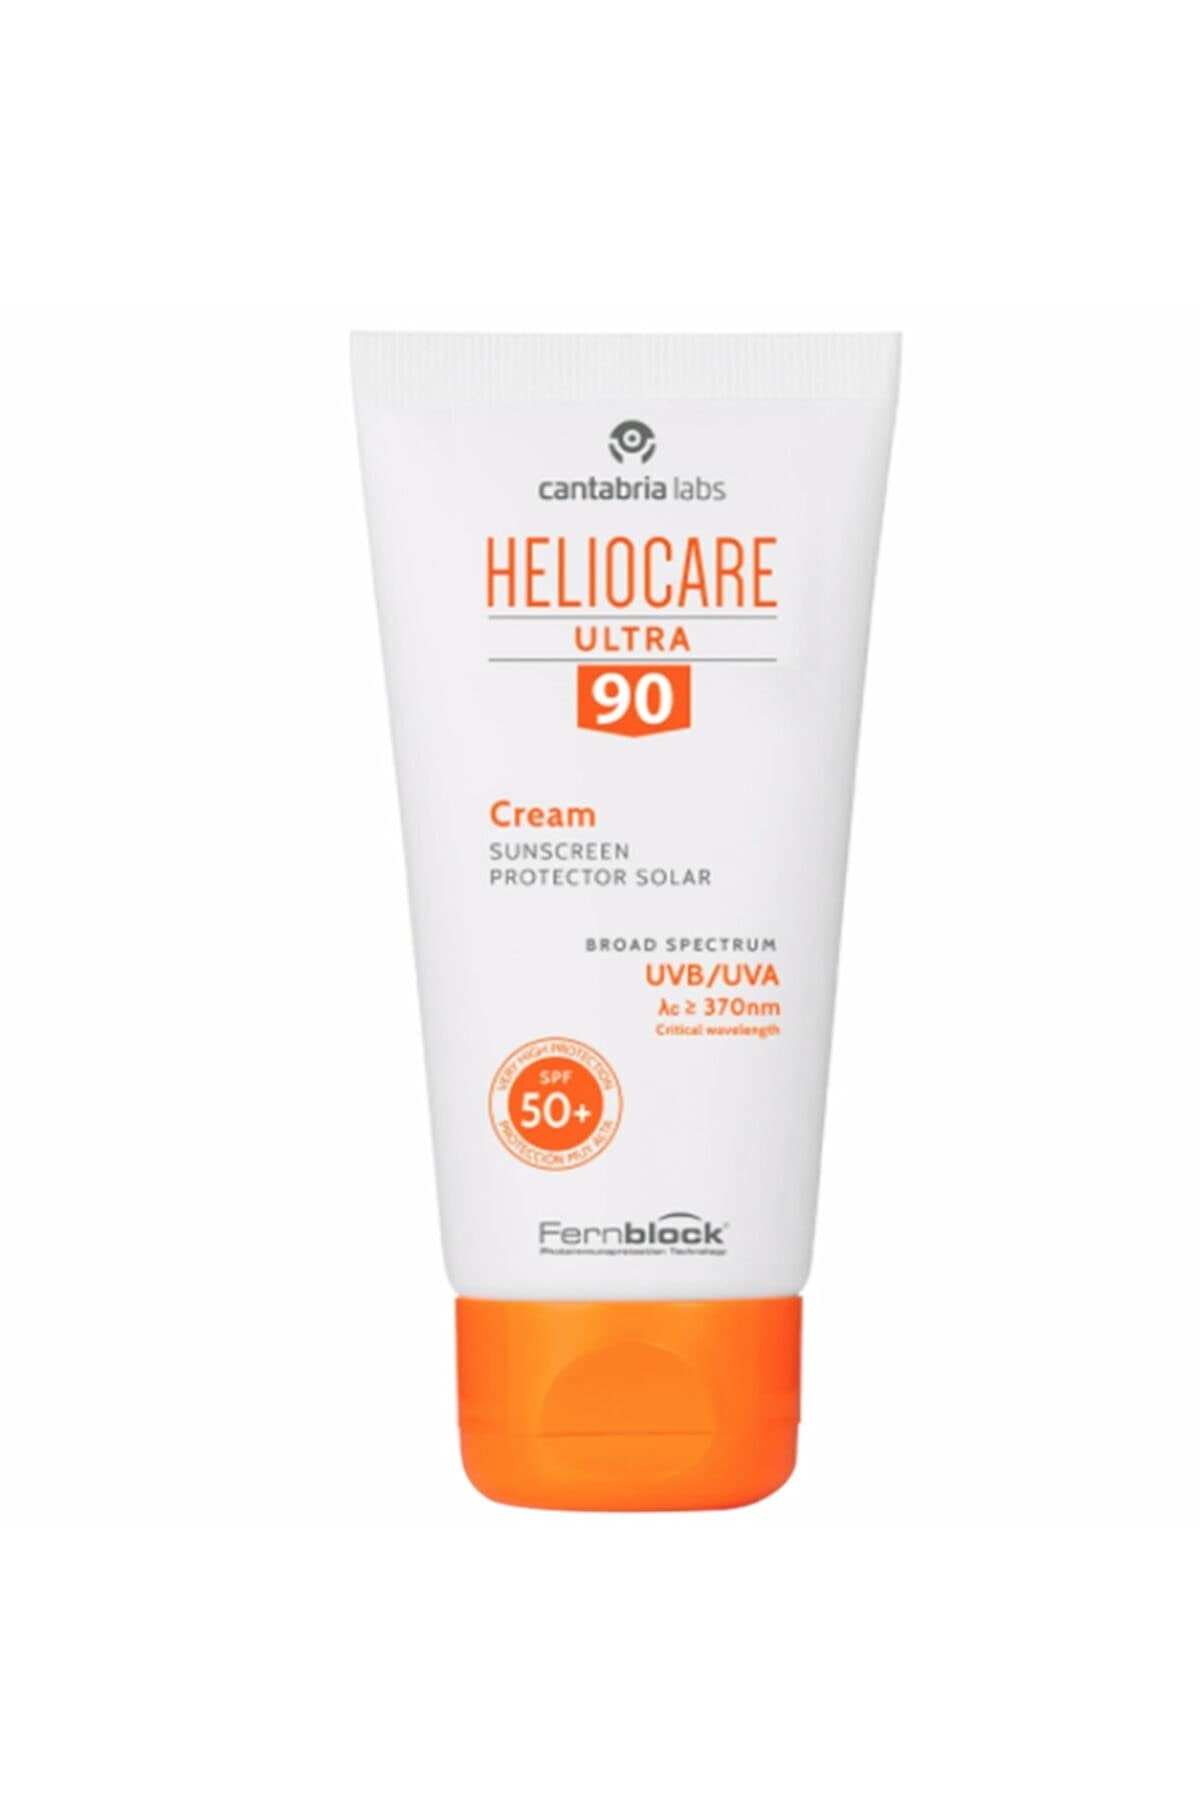 Heliocare Ultra 90 Cream SPF50+ / Sun Cream For Face/Daily UVA and UVB Anti-Ageing Sun Block/Combination, Dry and Normal Skin Types/Matte Finish (50ml)